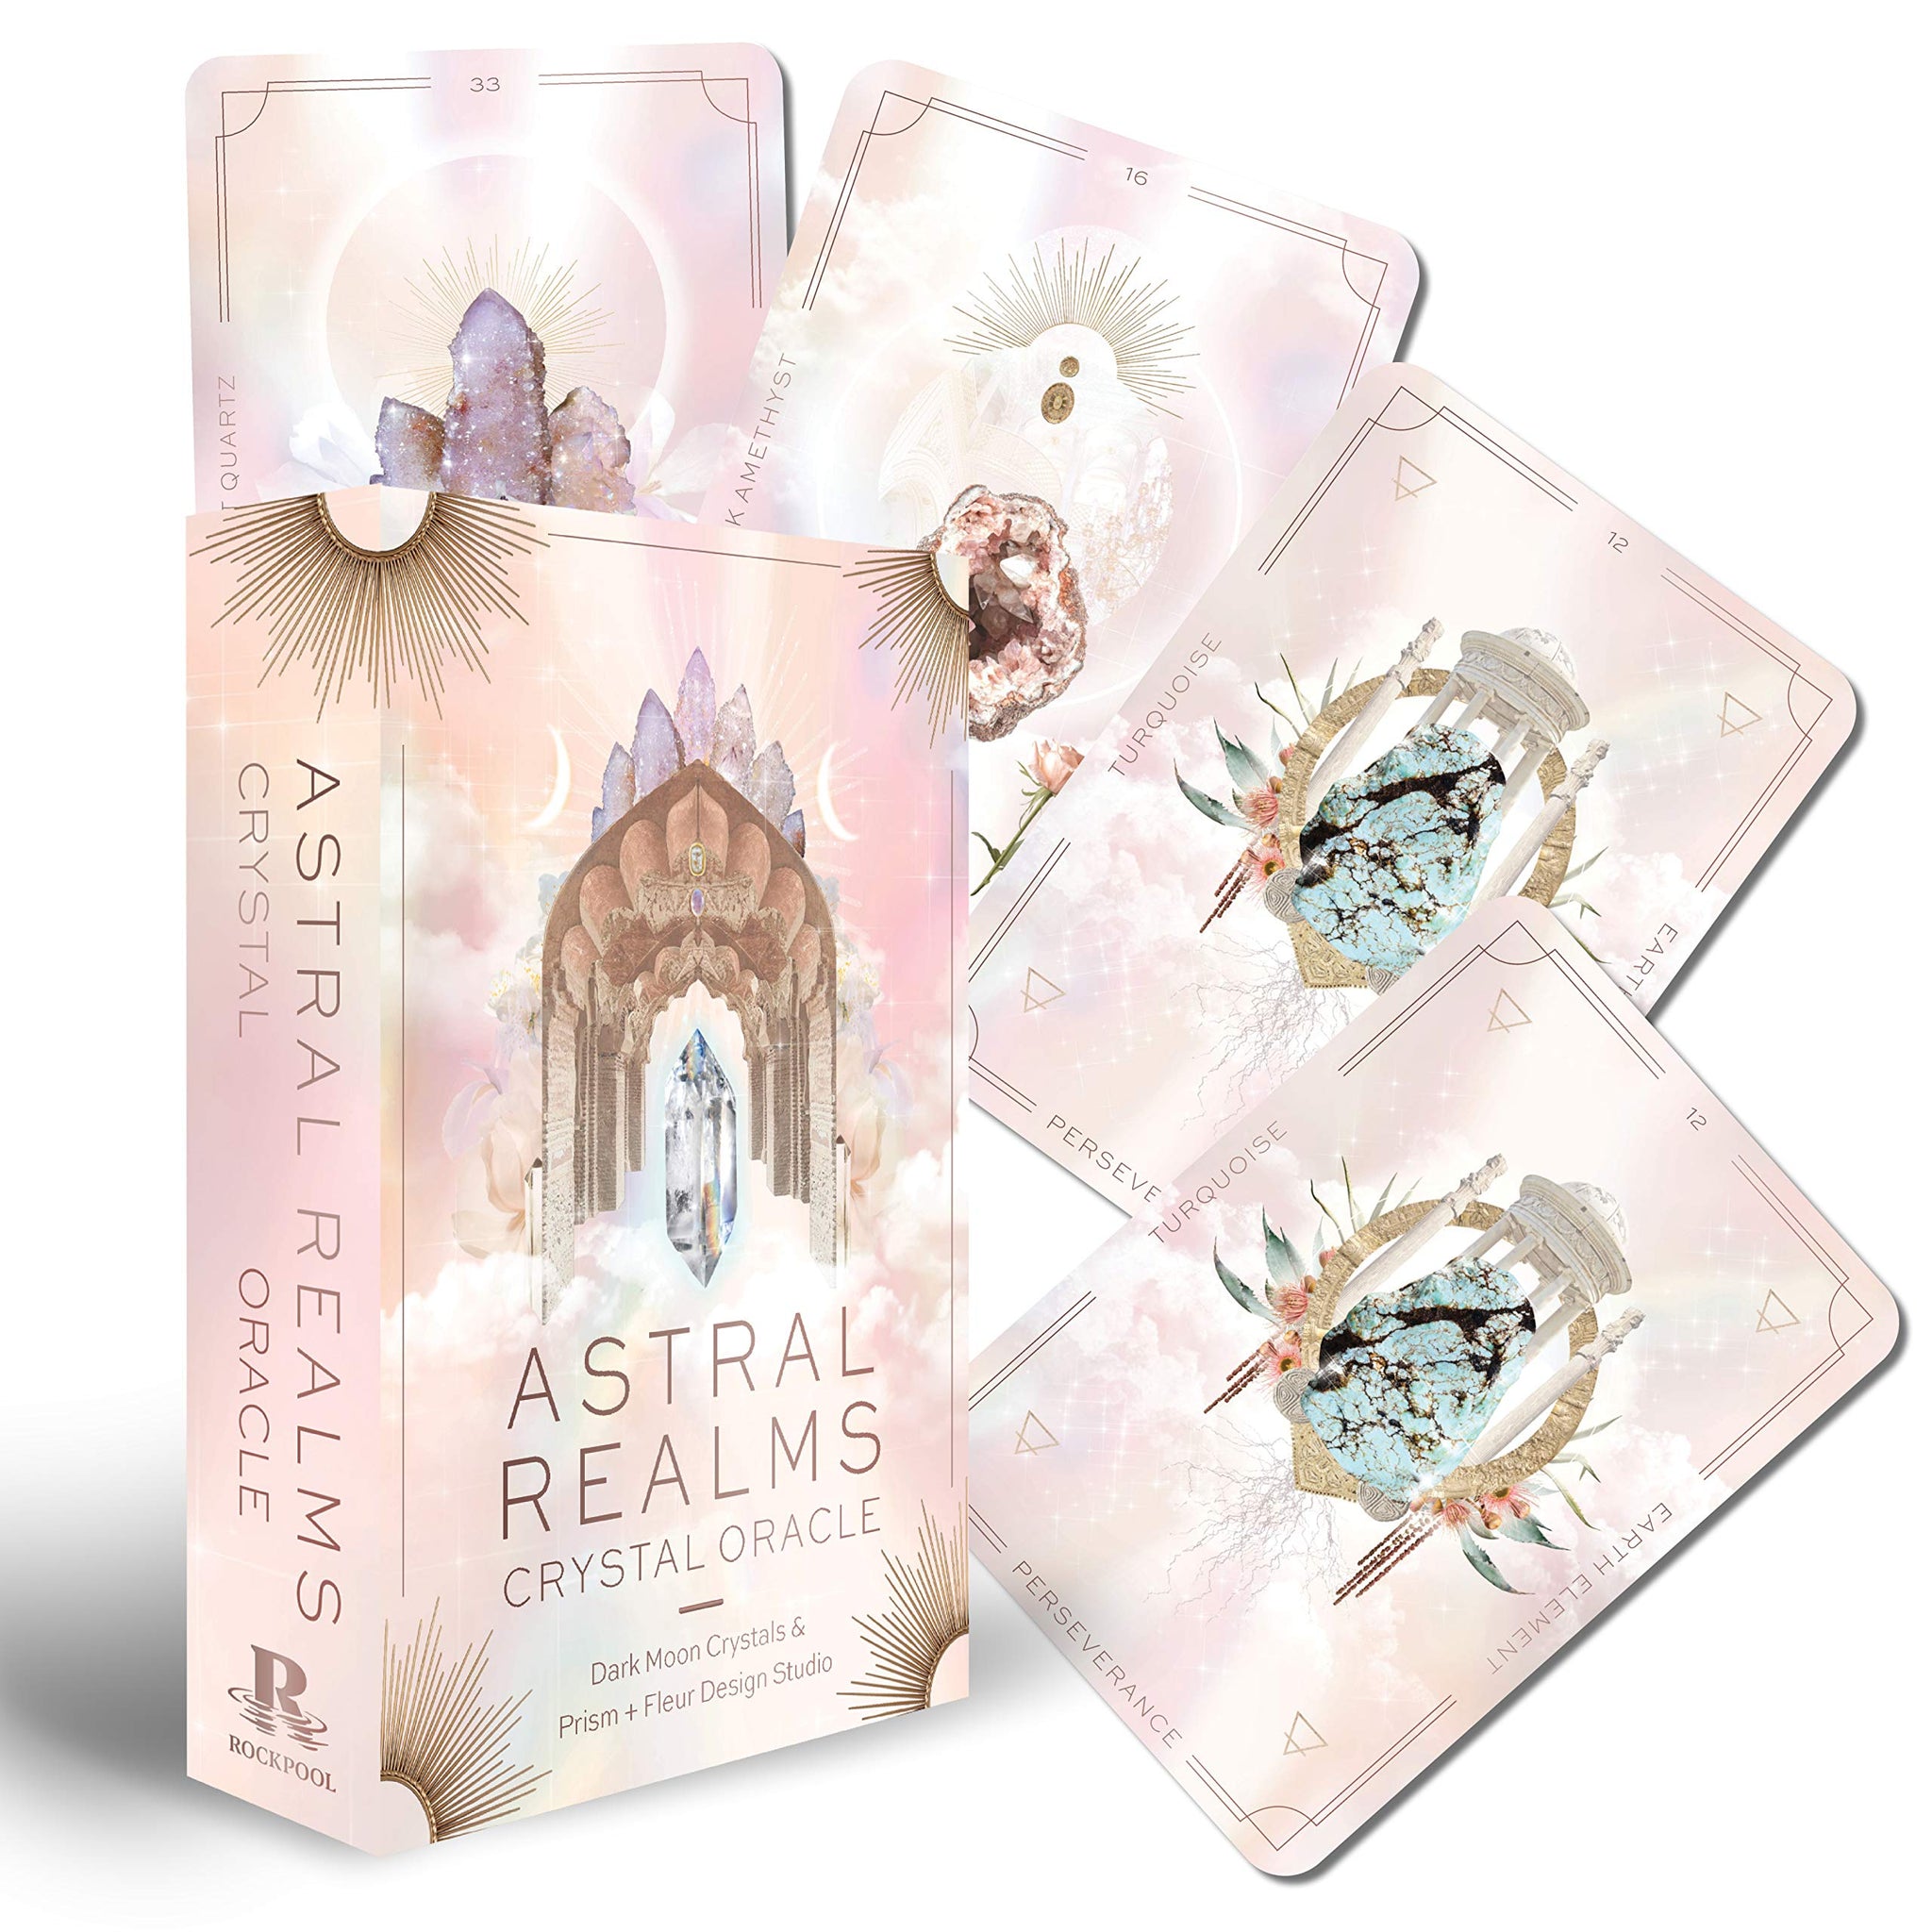 Astral Realms Crystal Oracle - Divine Clarity